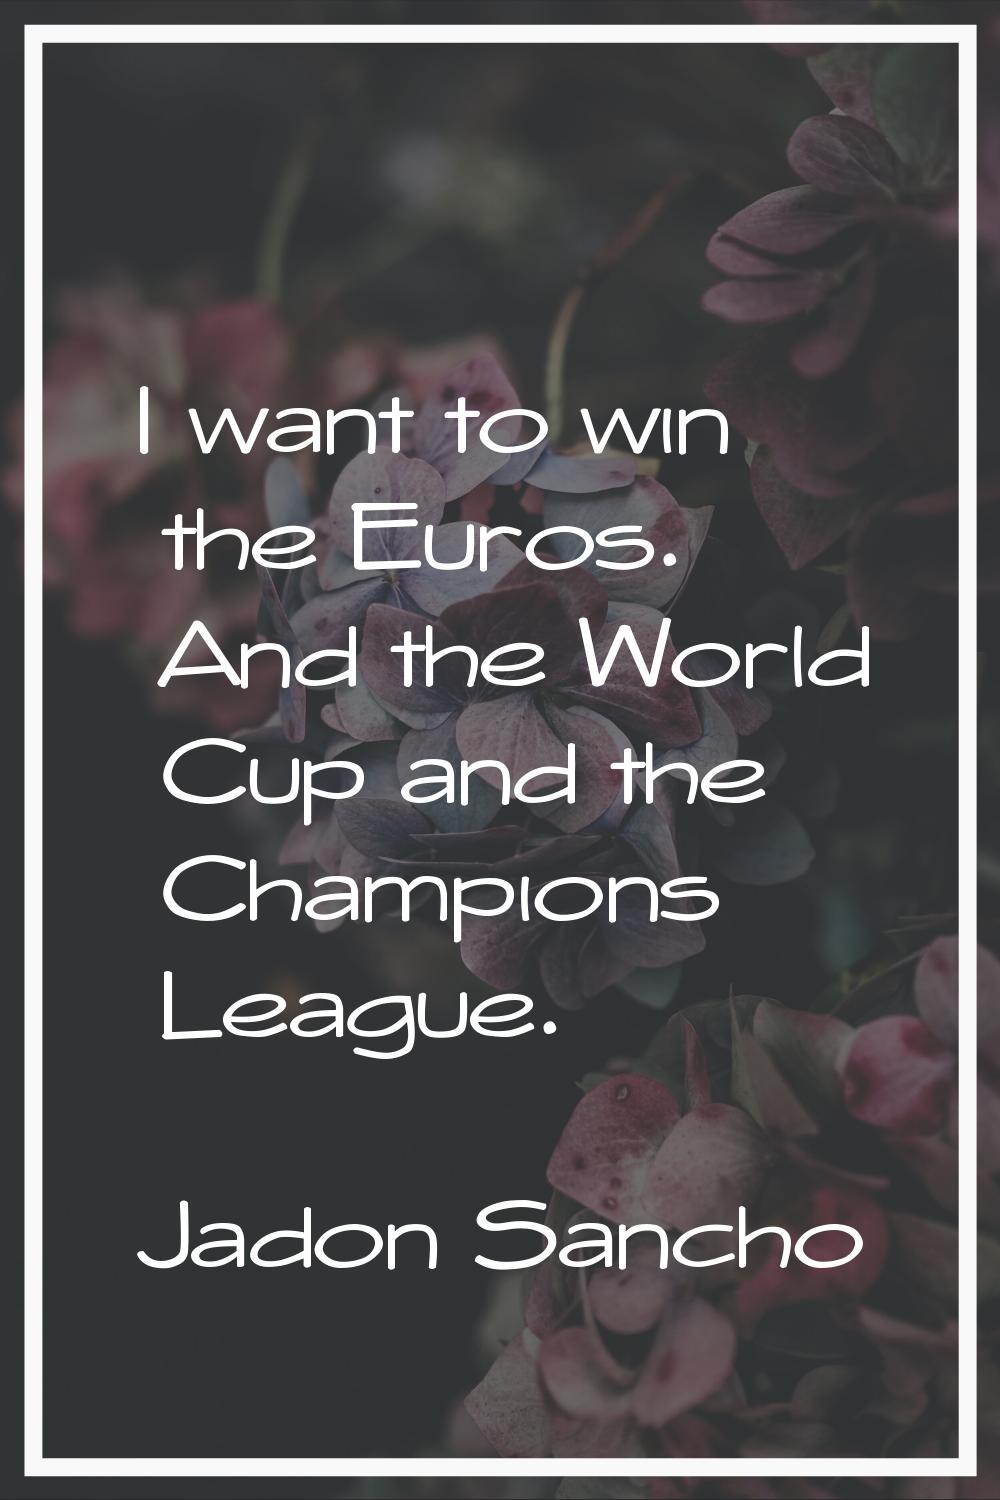 I want to win the Euros. And the World Cup and the Champions League.